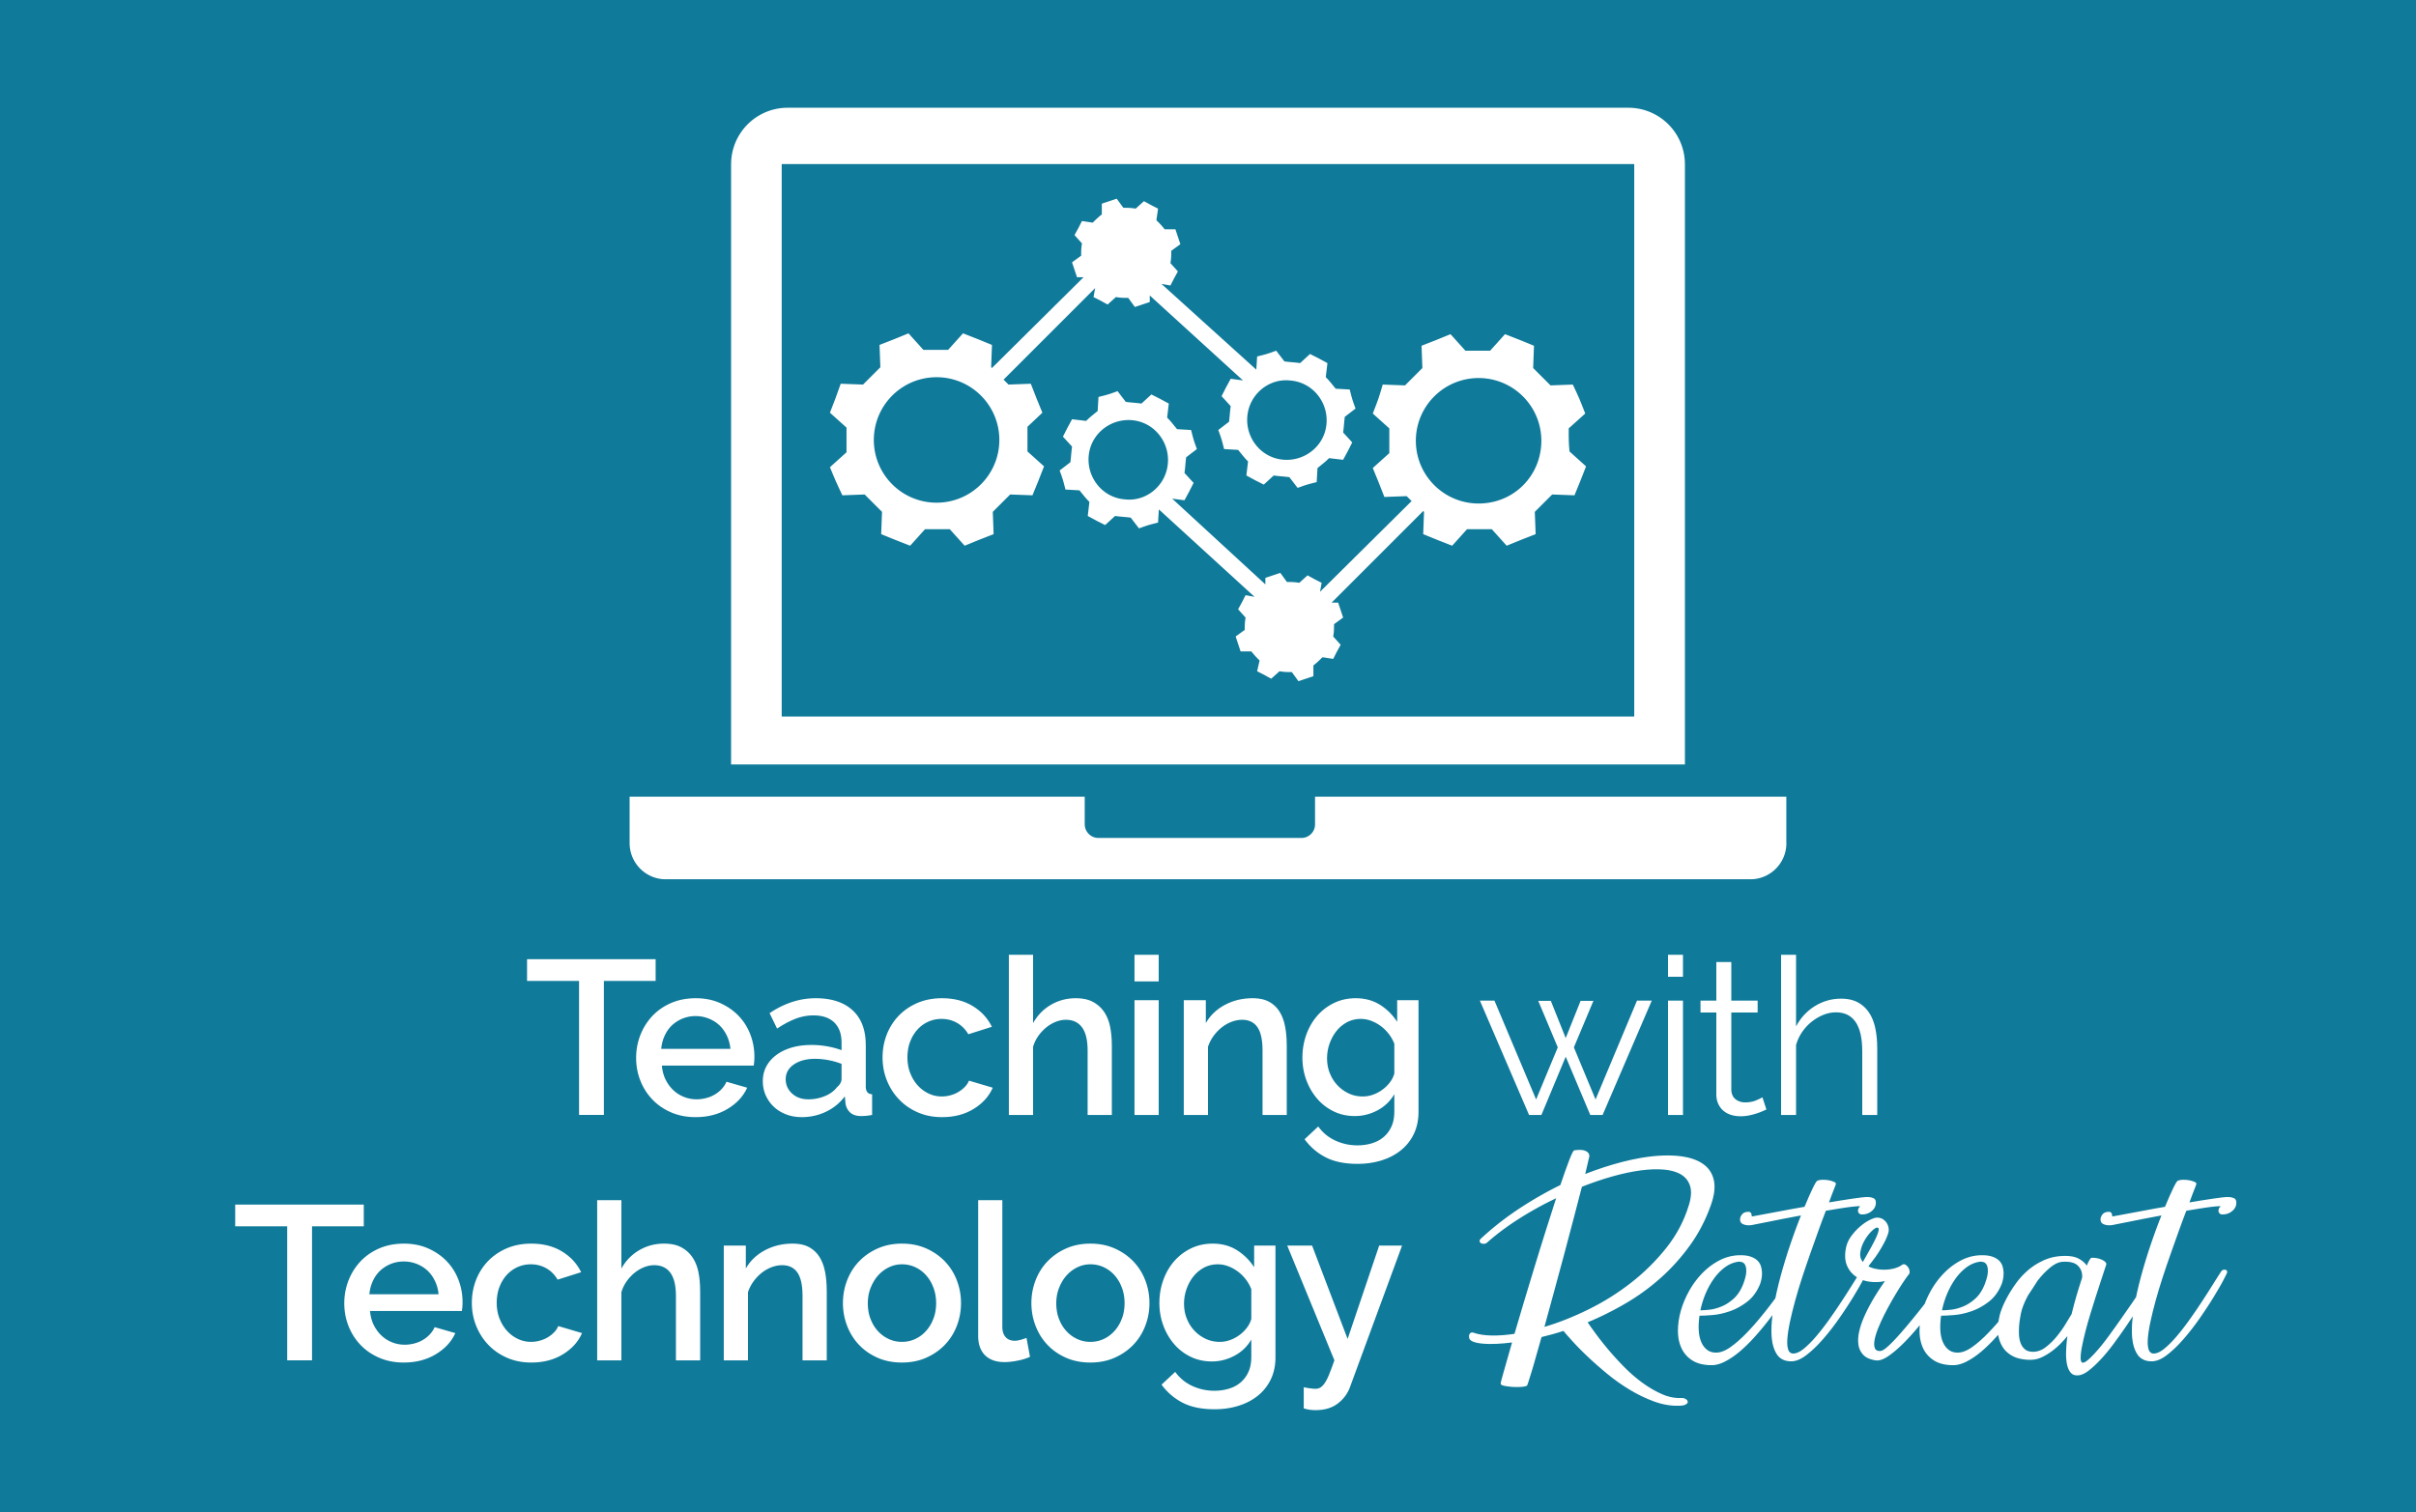 Teaching with Technology Retreat graphic